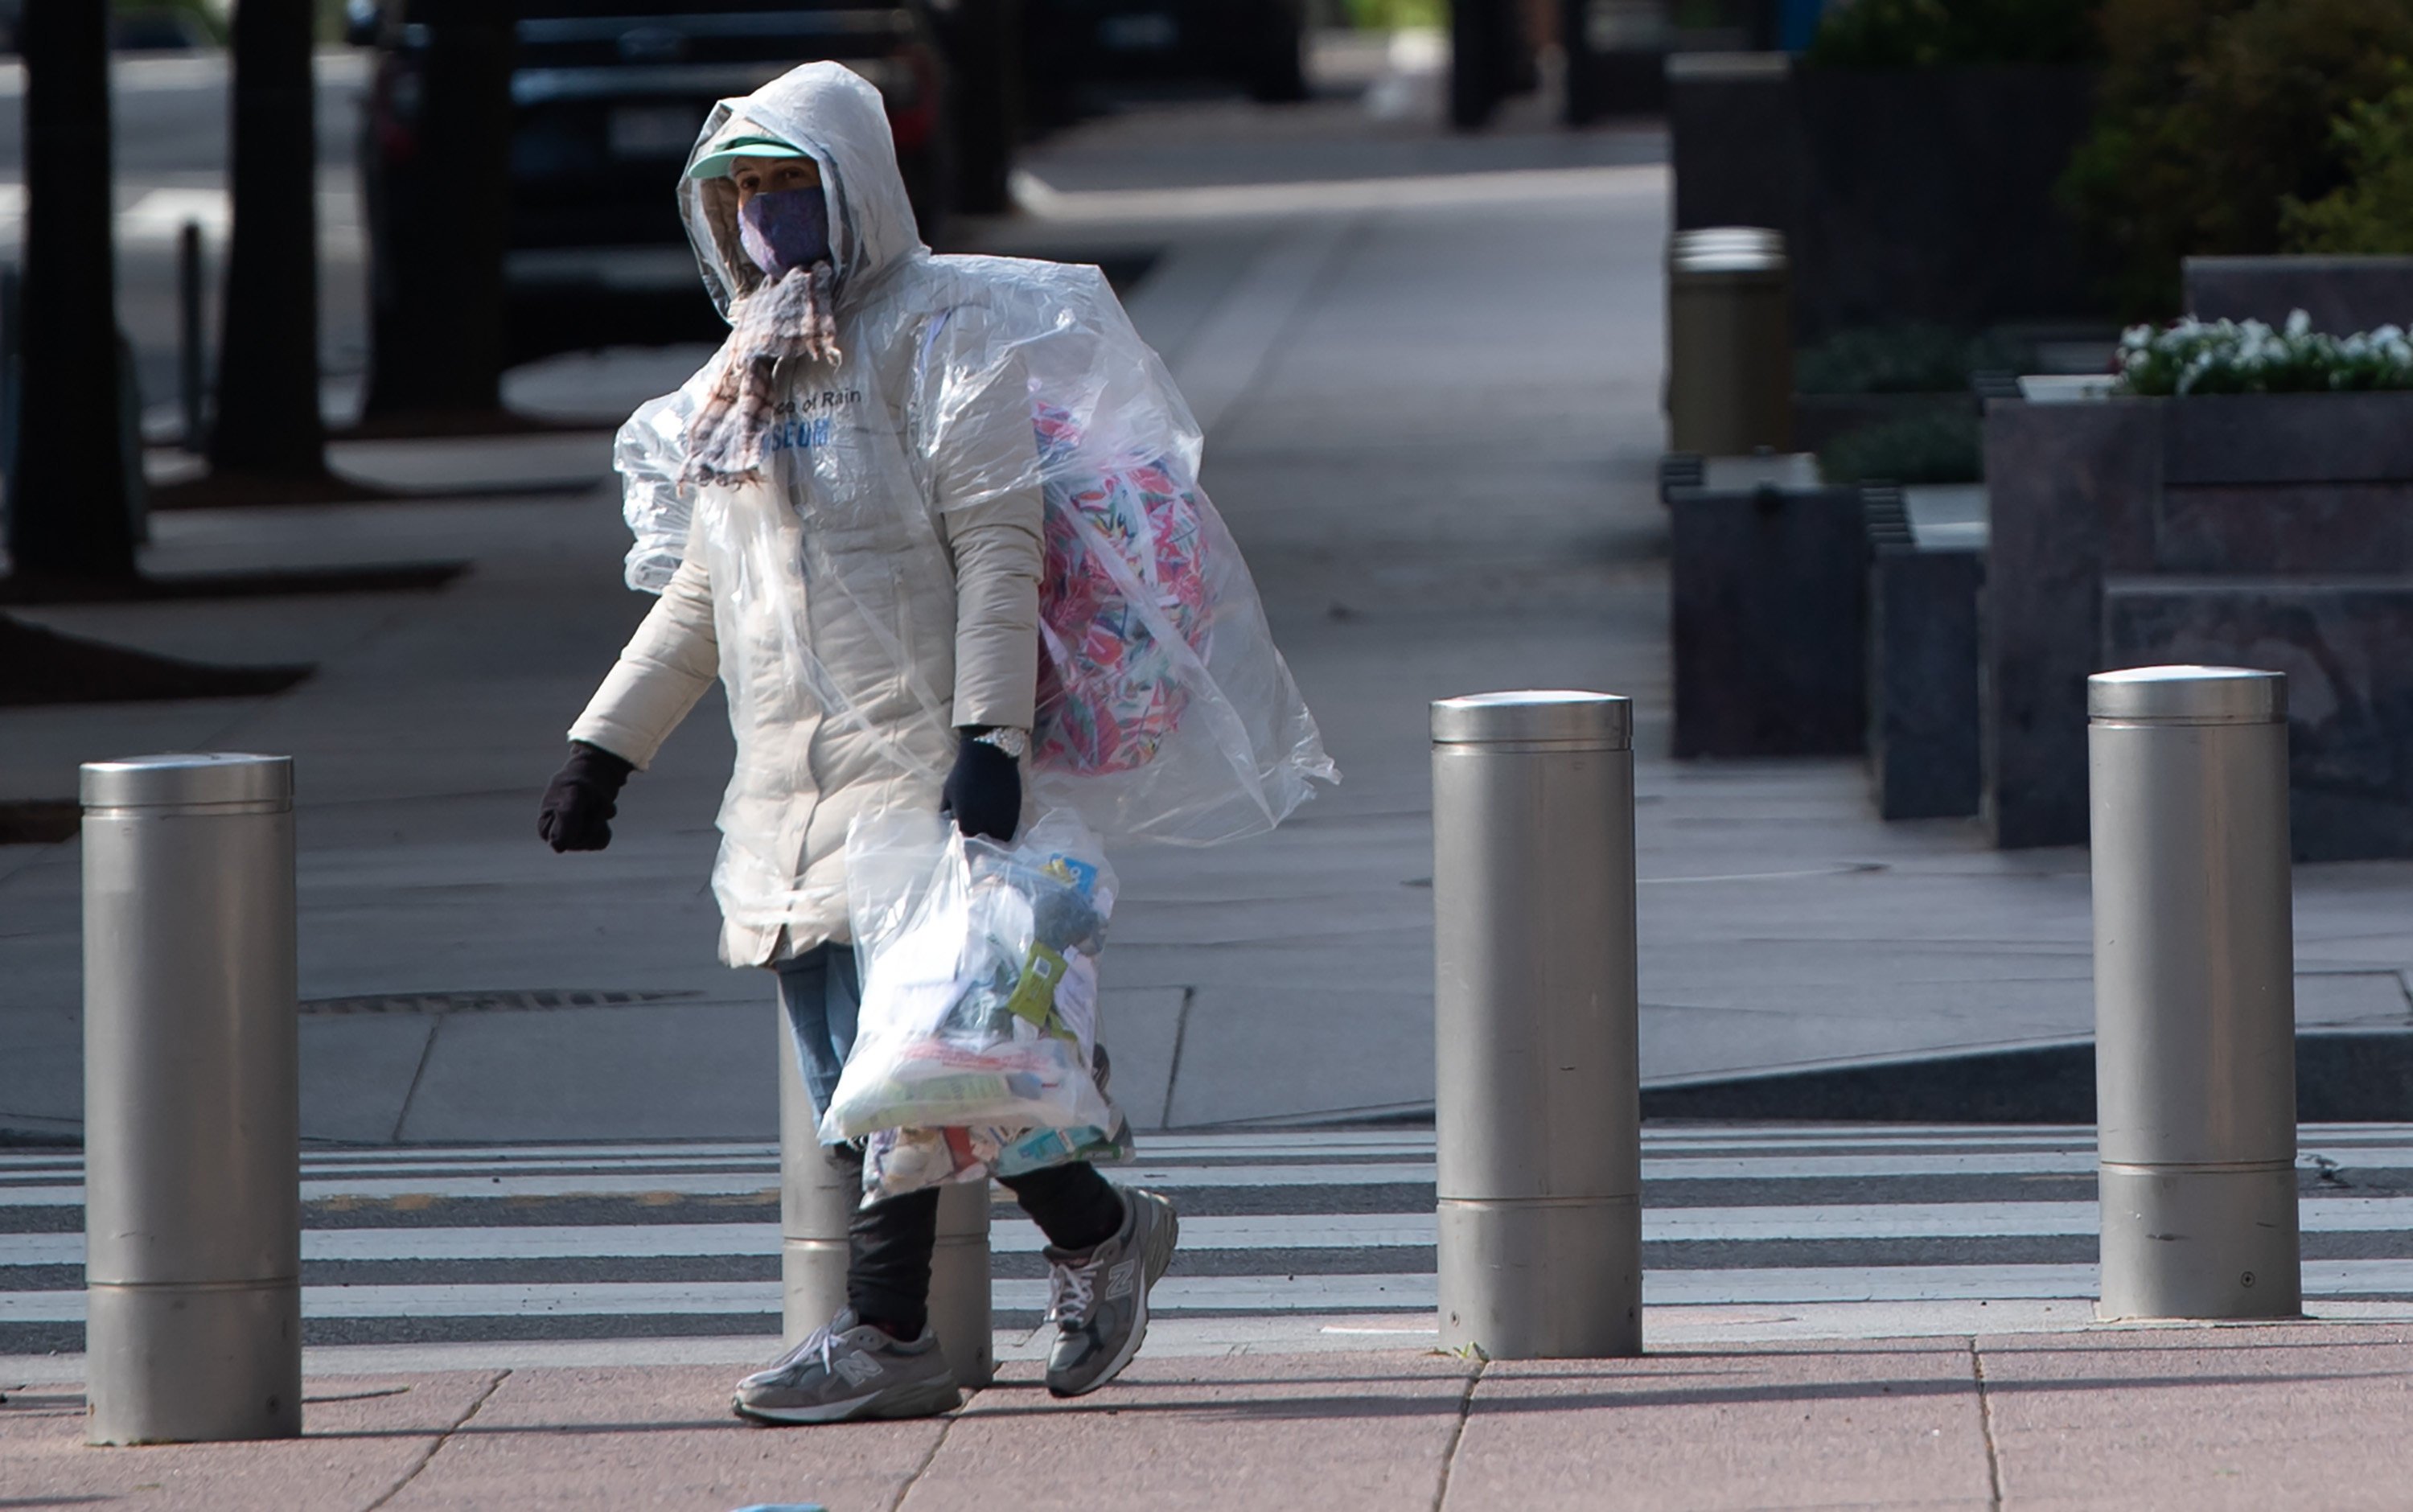 A person wrapped in plastic walks outside the headquarters of the International Monetary Fund during the onset of the Covid-19 pandemic in Washington on April 15, 2020. Photo: AFP